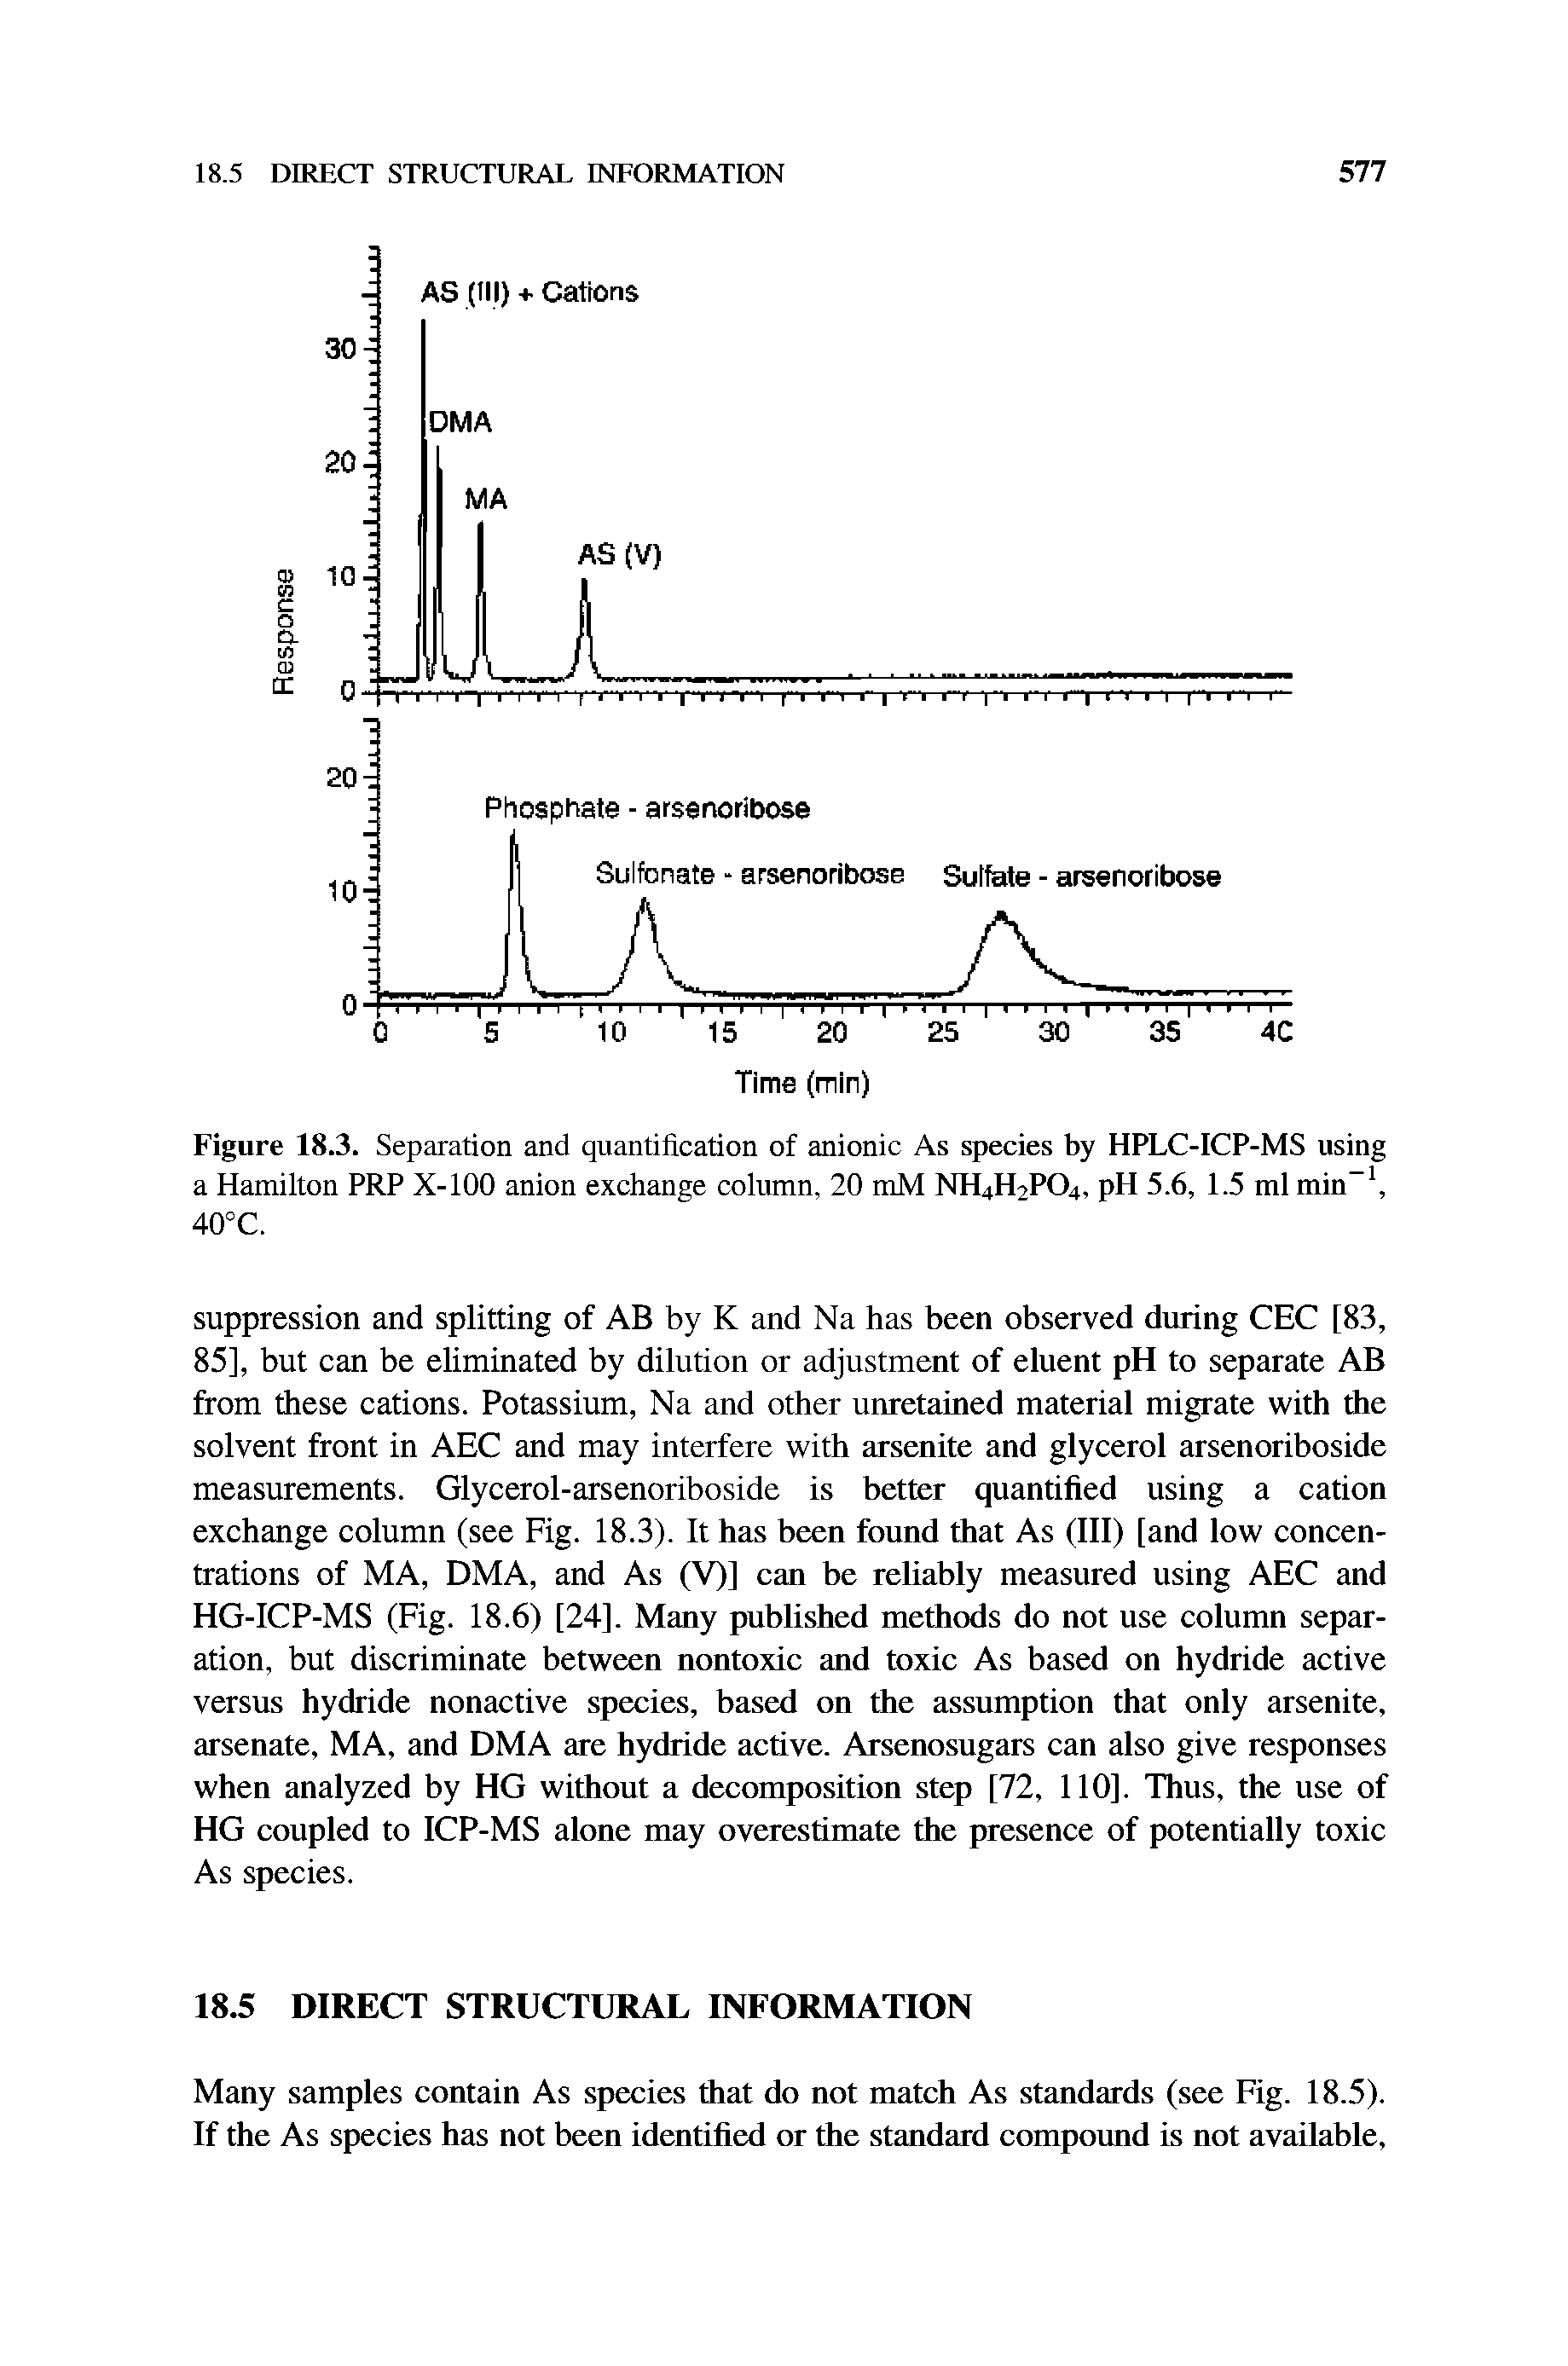 Figure 18.3. Separation and quantification of anionic As species by HPLC-ICP-MS using a Hamilton PRP X-100 anion exchange column, 20 mM NH4H2PO4, pH 5.6, 1.5 ml min-1, 40° C.